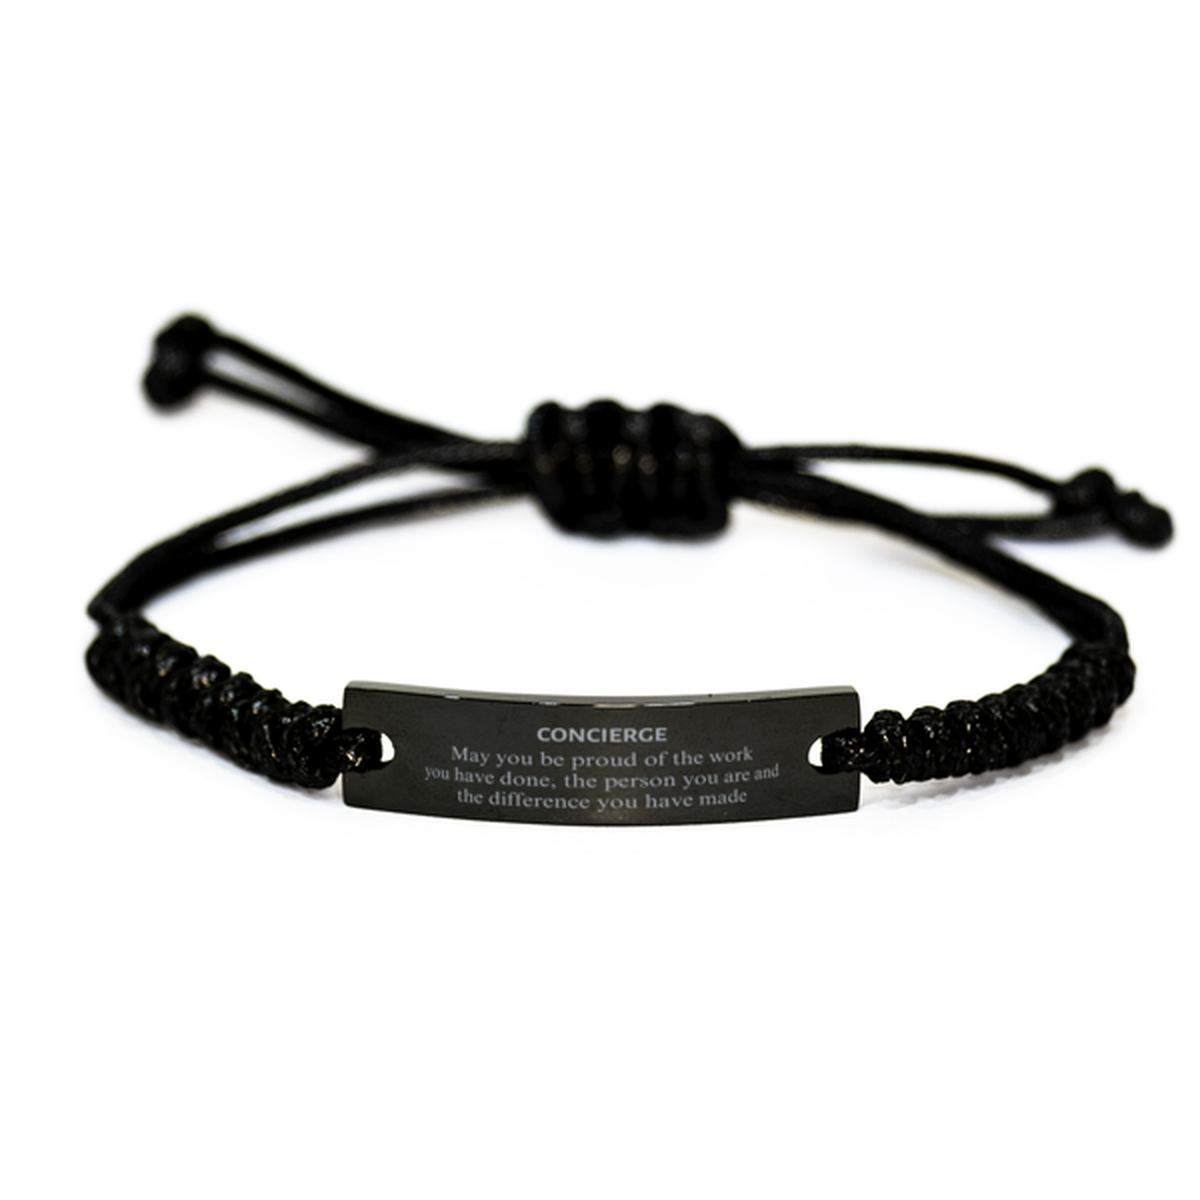 Concierge May you be proud of the work you have done, Retirement Concierge Black Rope Bracelet for Colleague Appreciation Gifts Amazing for Concierge